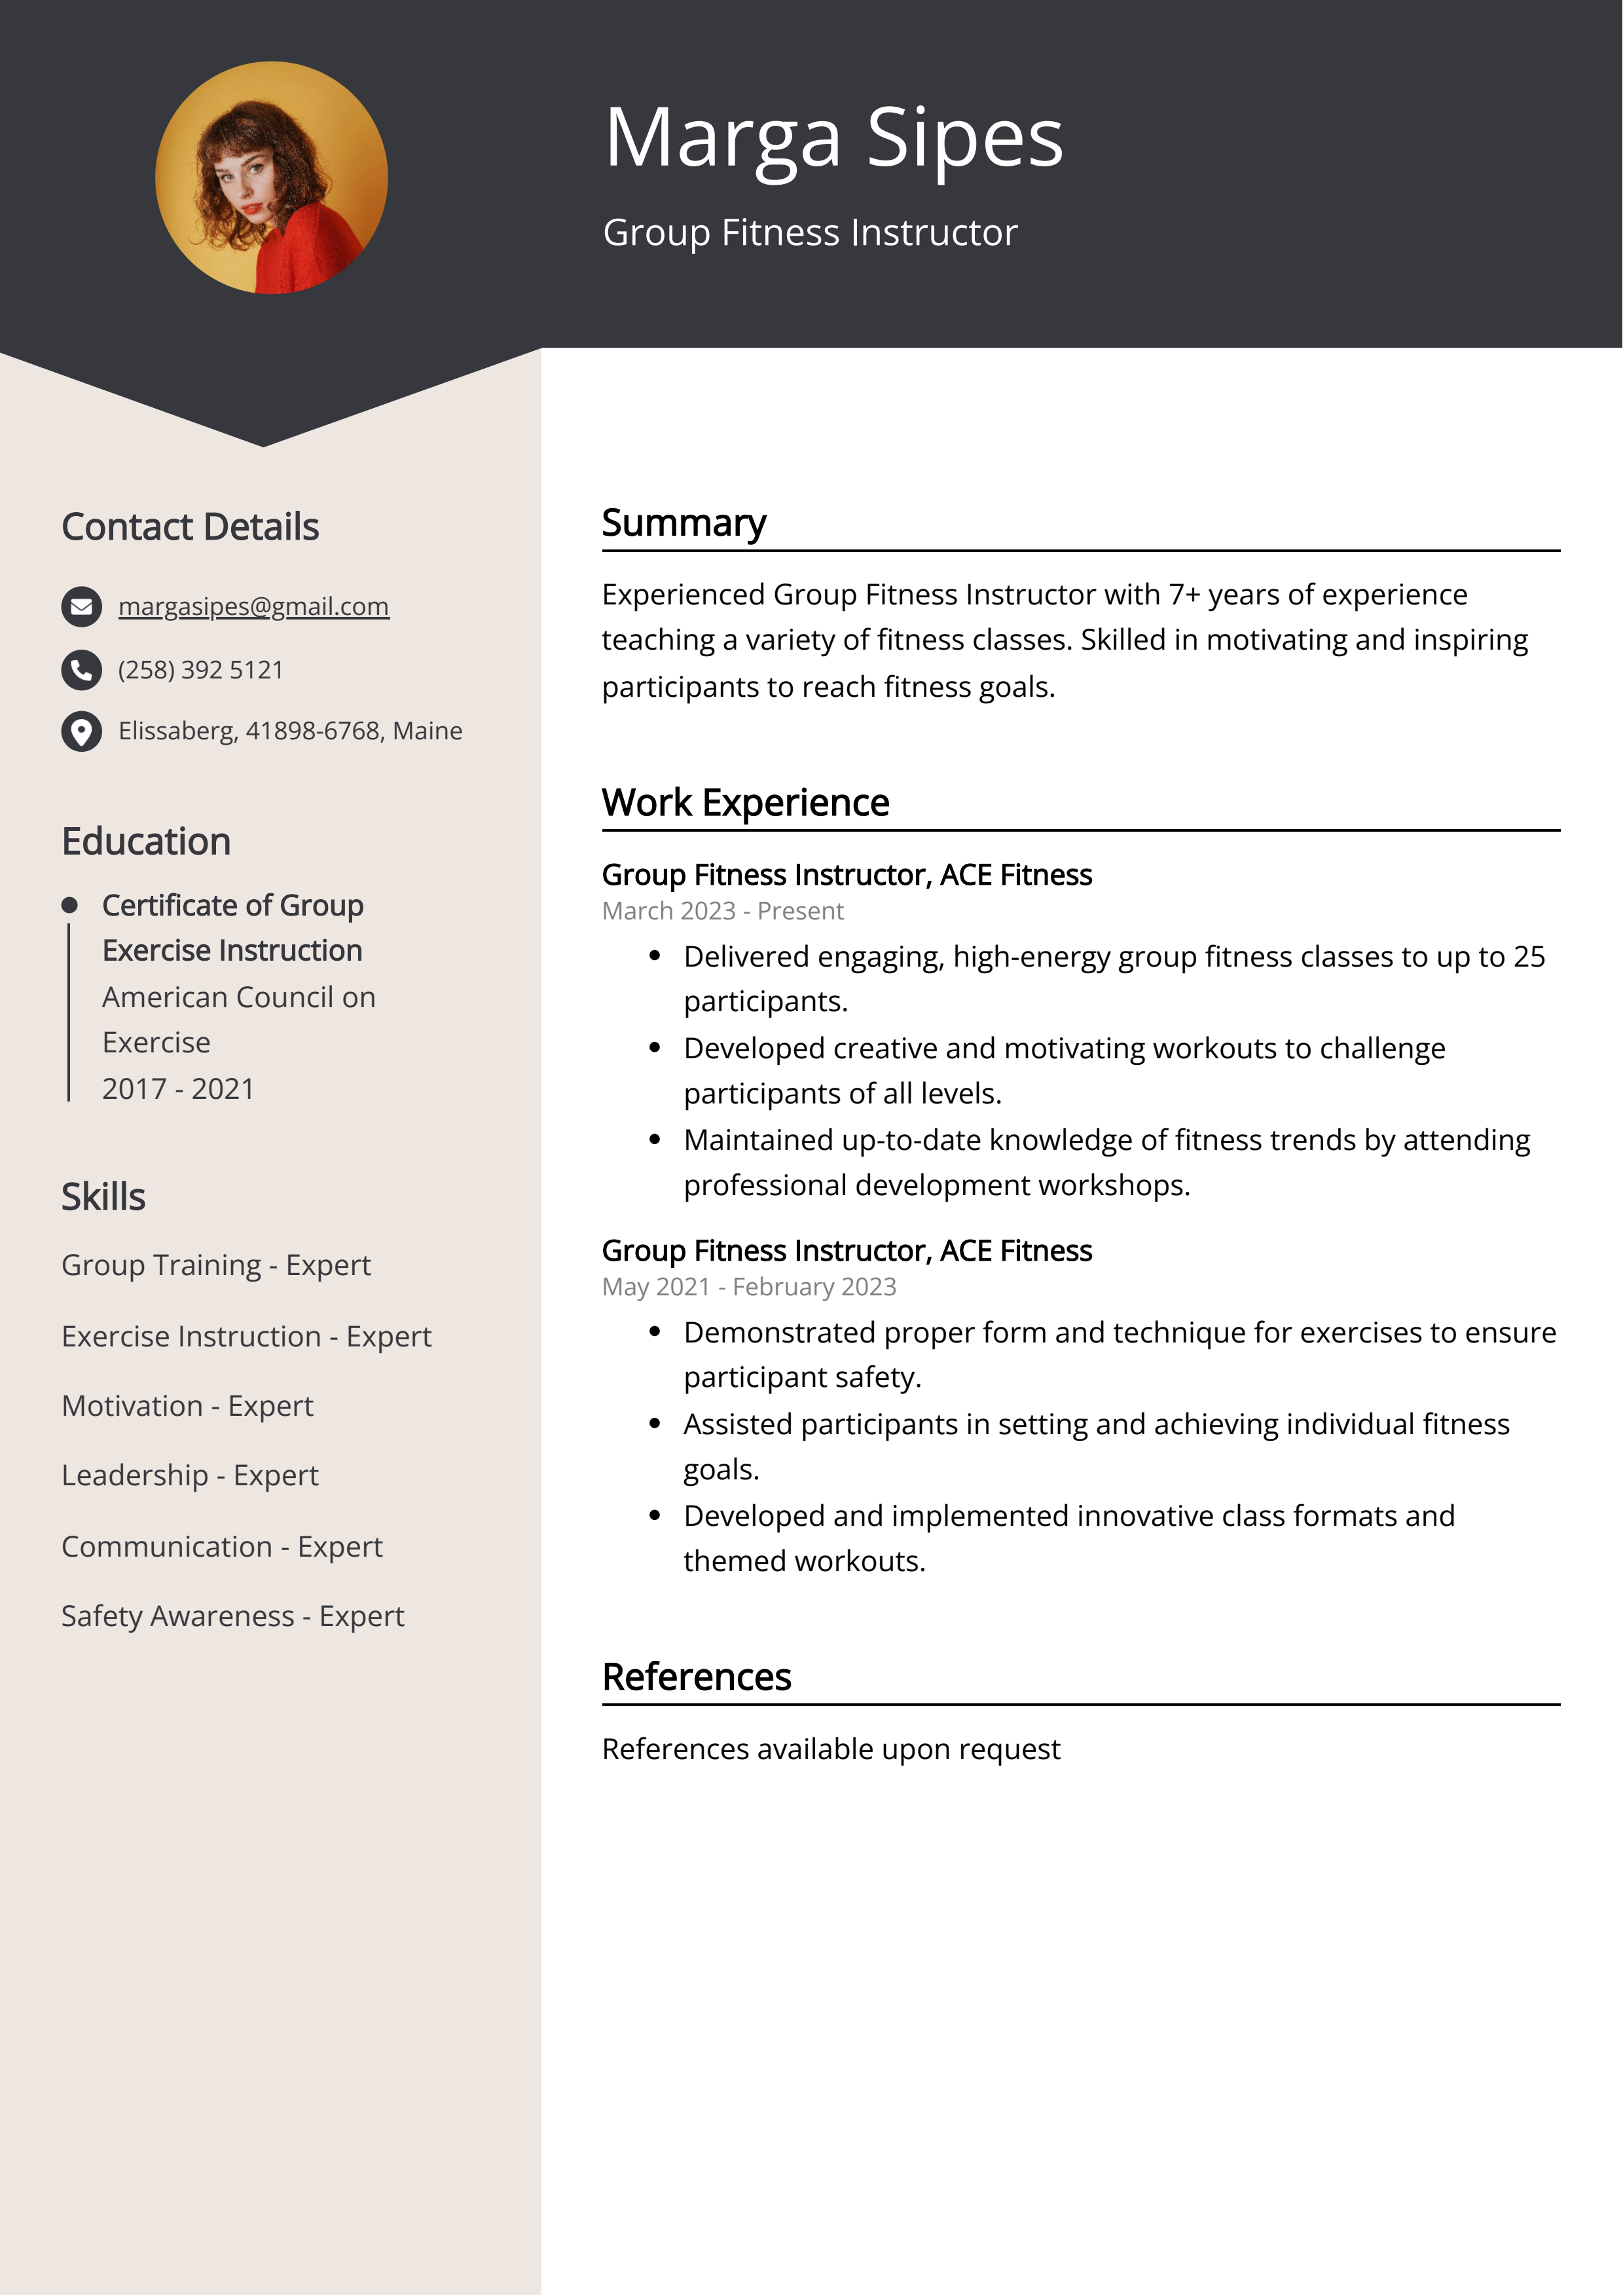 Group Fitness Instructor CV Example